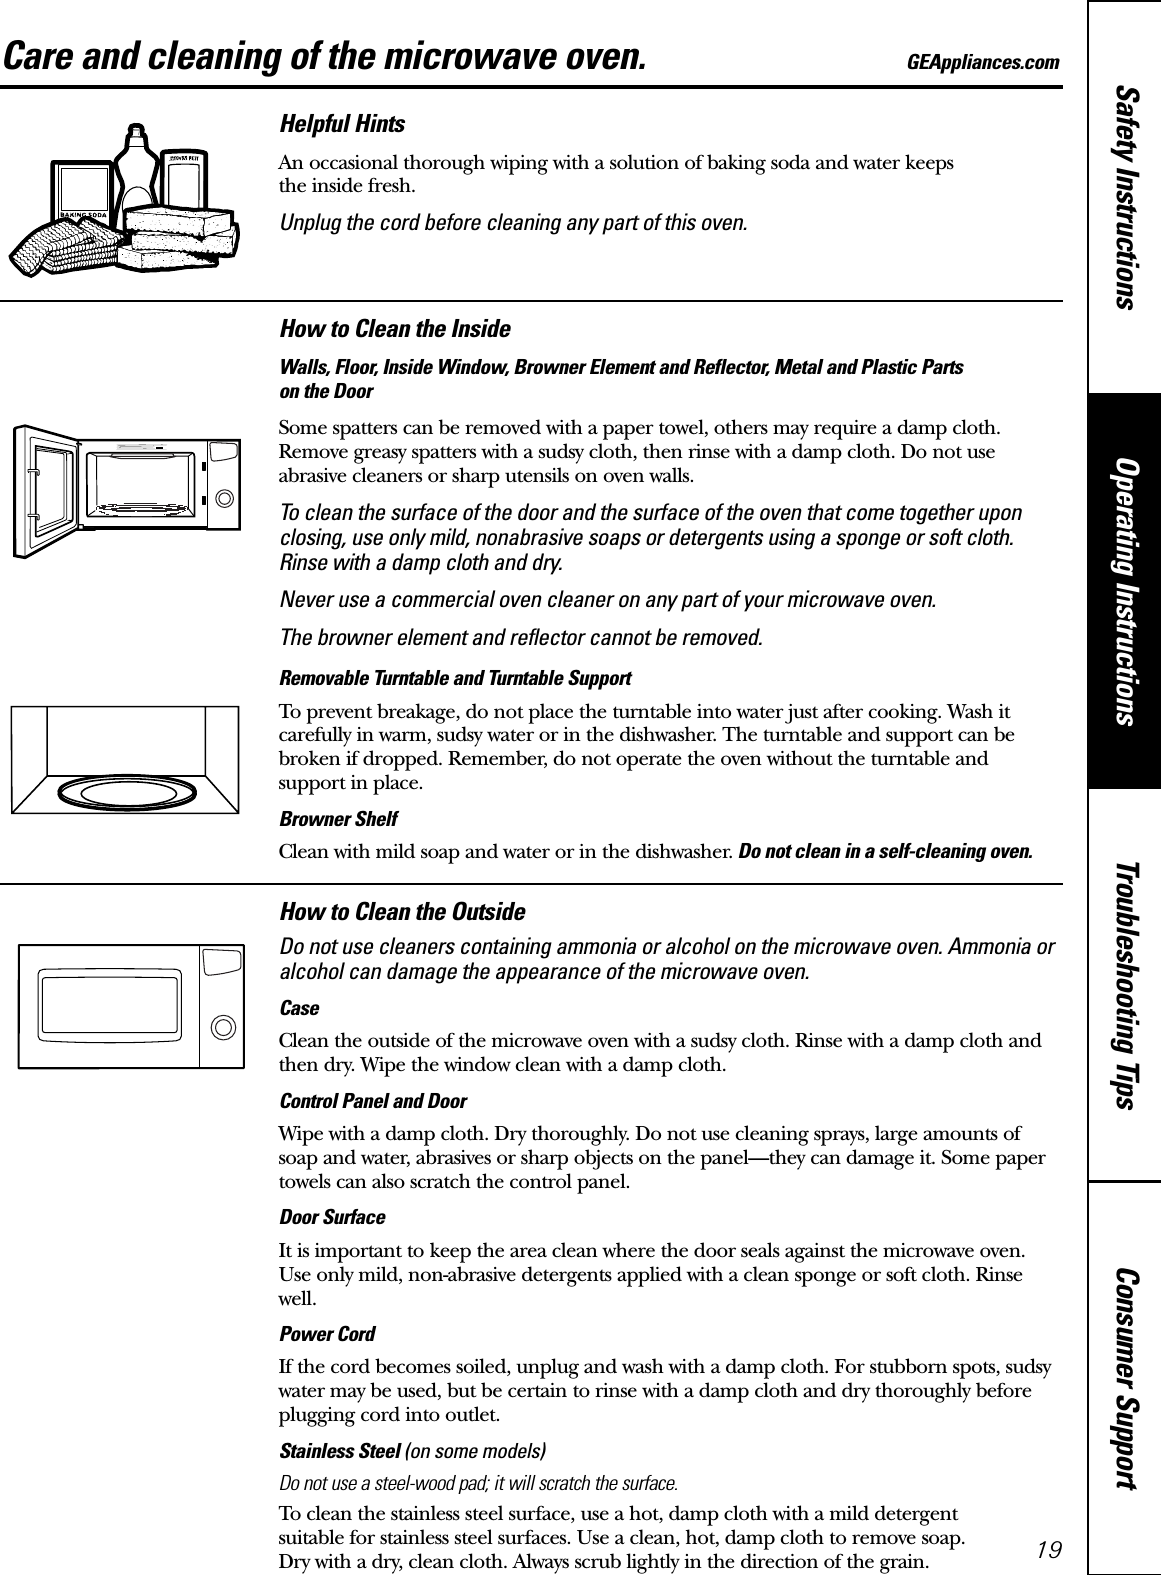 Consumer SupportTroubleshooting TipsOperating InstructionsSafety InstructionsCare and cleaning of the microwave oven. GEAppliances.comHelpful HintsAn occasional thorough wiping with a solution of baking soda and water keeps the inside fresh.Unplug the cord before cleaning any part of this oven.How to Clean the InsideWalls, Floor, Inside Window, Browner Element and Reflector, Metal and Plastic Parts on the DoorSome spatters can be removed with a paper towel, others may require a damp cloth.Remove greasy spatters with a sudsy cloth, then rinse with a damp cloth. Do not use abrasive cleaners or sharp utensils on oven walls. To clean the surface of the door and the surface of the oven that come together uponclosing, use only mild, nonabrasive soaps or detergents using a sponge or soft cloth.Rinse with a damp cloth and dry.Never use a commercial oven cleaner on any part of your microwave oven.The browner element and reflector cannot be removed.Removable Turntable and Turntable Support To prevent breakage, do not place the turntable into water just after cooking. Wash itcarefully in warm, sudsy water or in the dishwasher. The turntable and support can bebroken if dropped. Remember, do not operate the oven without the turntable and support in place.Browner ShelfClean with mild soap and water or in the dishwasher. Do not clean in a self-cleaning oven.How to Clean the OutsideDo not use cleaners containing ammonia or alcohol on the microwave oven. Ammonia oralcohol can damage the appearance of the microwave oven.CaseClean the outside of the microwave oven with a sudsy cloth. Rinse with a damp cloth andthen dry. Wipe the window clean with a damp cloth. Control Panel and DoorWipe with a damp cloth. Dry thoroughly. Do not use cleaning sprays, large amounts ofsoap and water, abrasives or sharp objects on the panel—they can damage it. Some papertowels can also scratch the control panel.Door SurfaceIt is important to keep the area clean where the door seals against the microwave oven. Use only mild, non-abrasive detergents applied with a clean sponge or soft cloth. Rinsewell.Power CordIf the cord becomes soiled, unplug and wash with a damp cloth. For stubborn spots, sudsywater may be used, but be certain to rinse with a damp cloth and dry thoroughly beforeplugging cord into outlet.Stainless Steel (on some models)Do not use a steel-wood pad; it will scratch the surface.To clean the stainless steel surface, use a hot, damp cloth with a mild detergent suitable for stainless steel surfaces. Use a clean, hot, damp cloth to remove soap. Dry with a dry, clean cloth. Always scrub lightly in the direction of the grain. 19